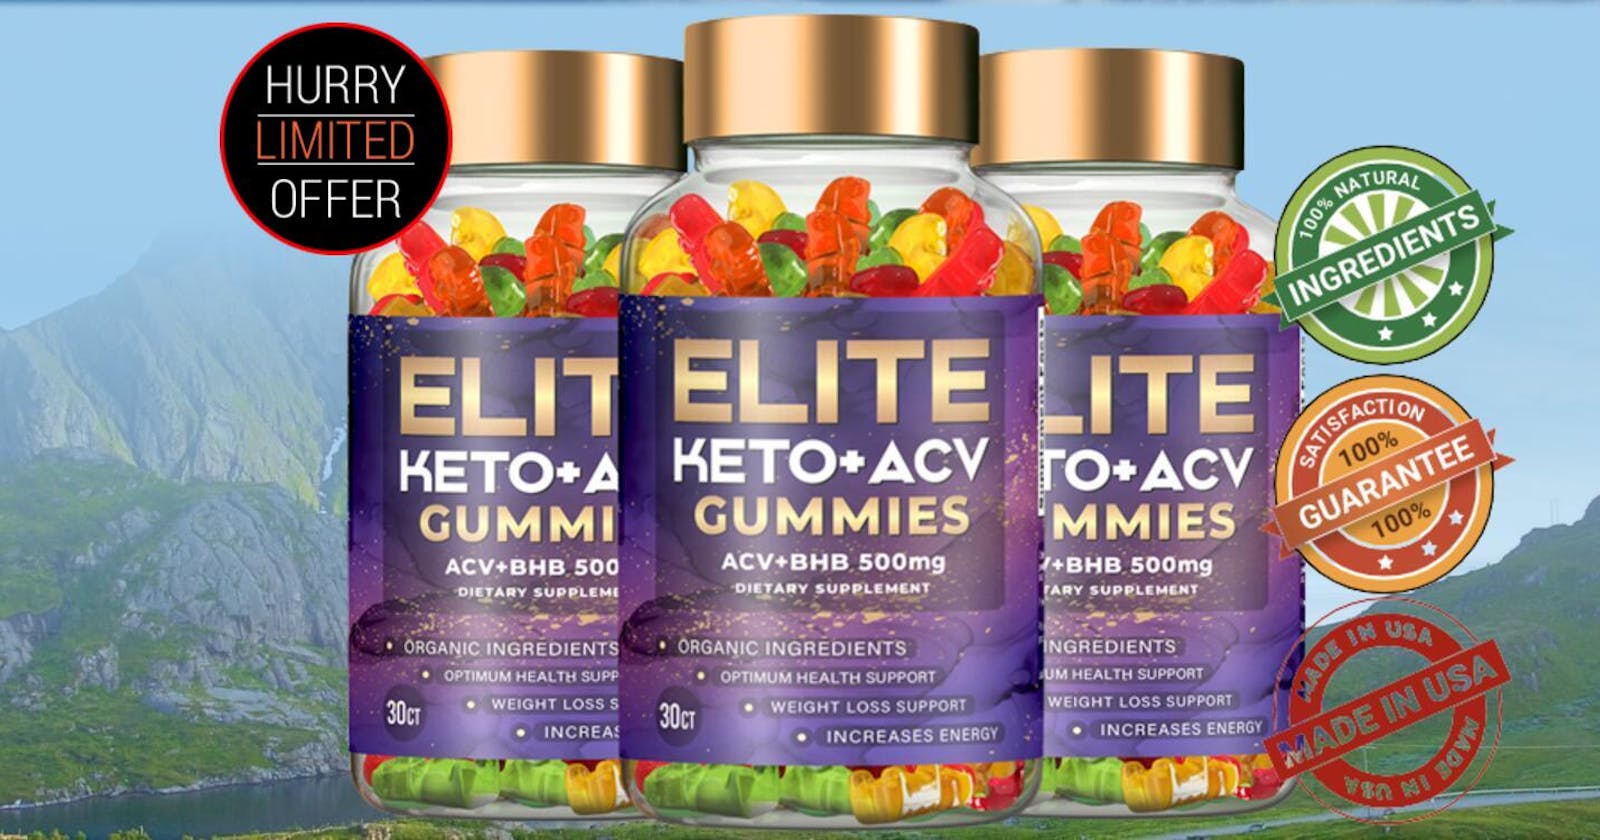 Elite Keto + ACV Gummies (#1 Premium Weight Loss) Reduce Appetite & Cravings For Instant Fat Burning(REAL OR HOAX)